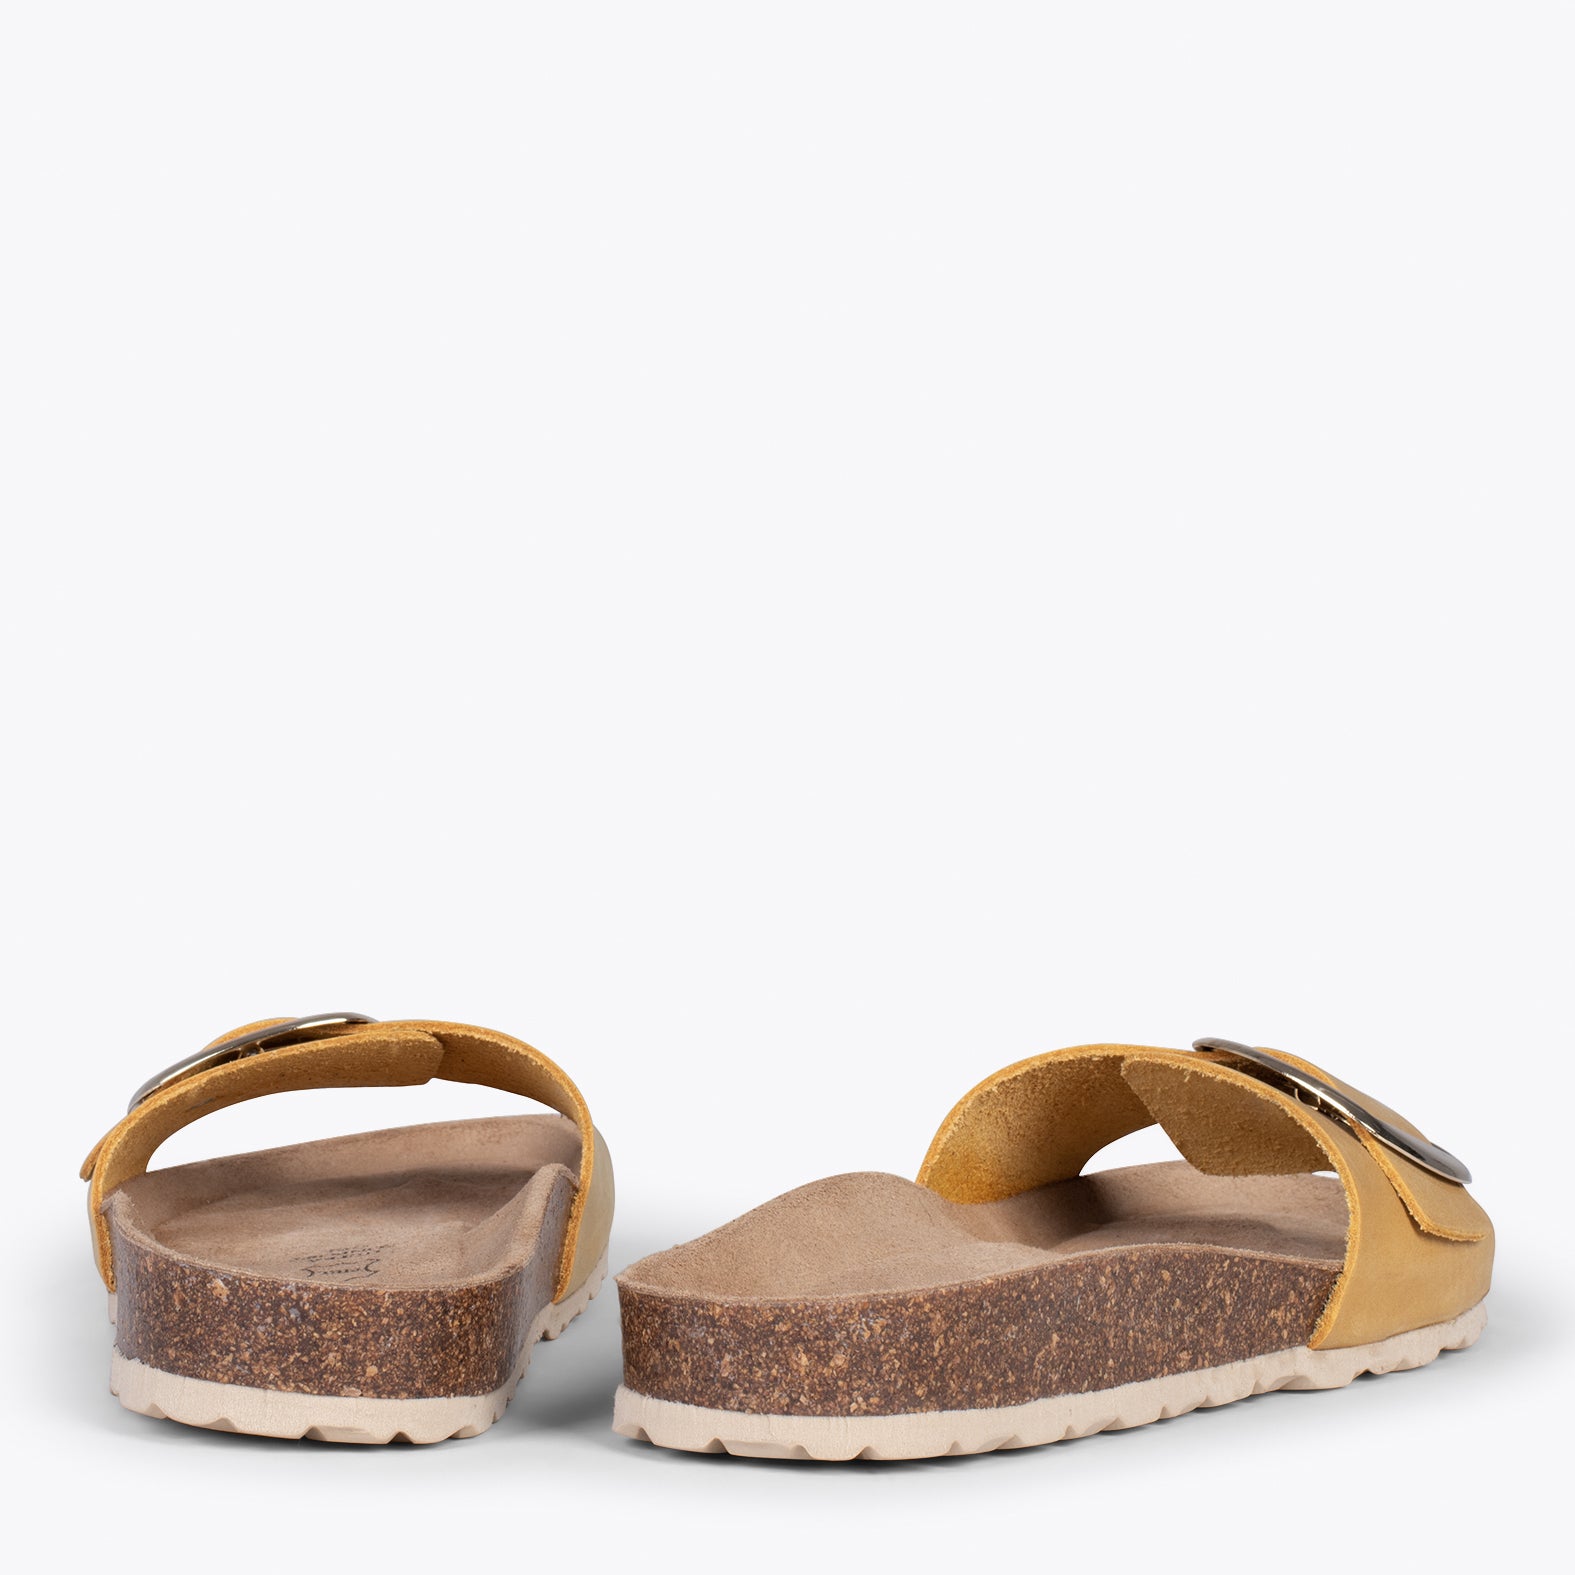 CLAVEL – MUSTARD leather slides with buckle